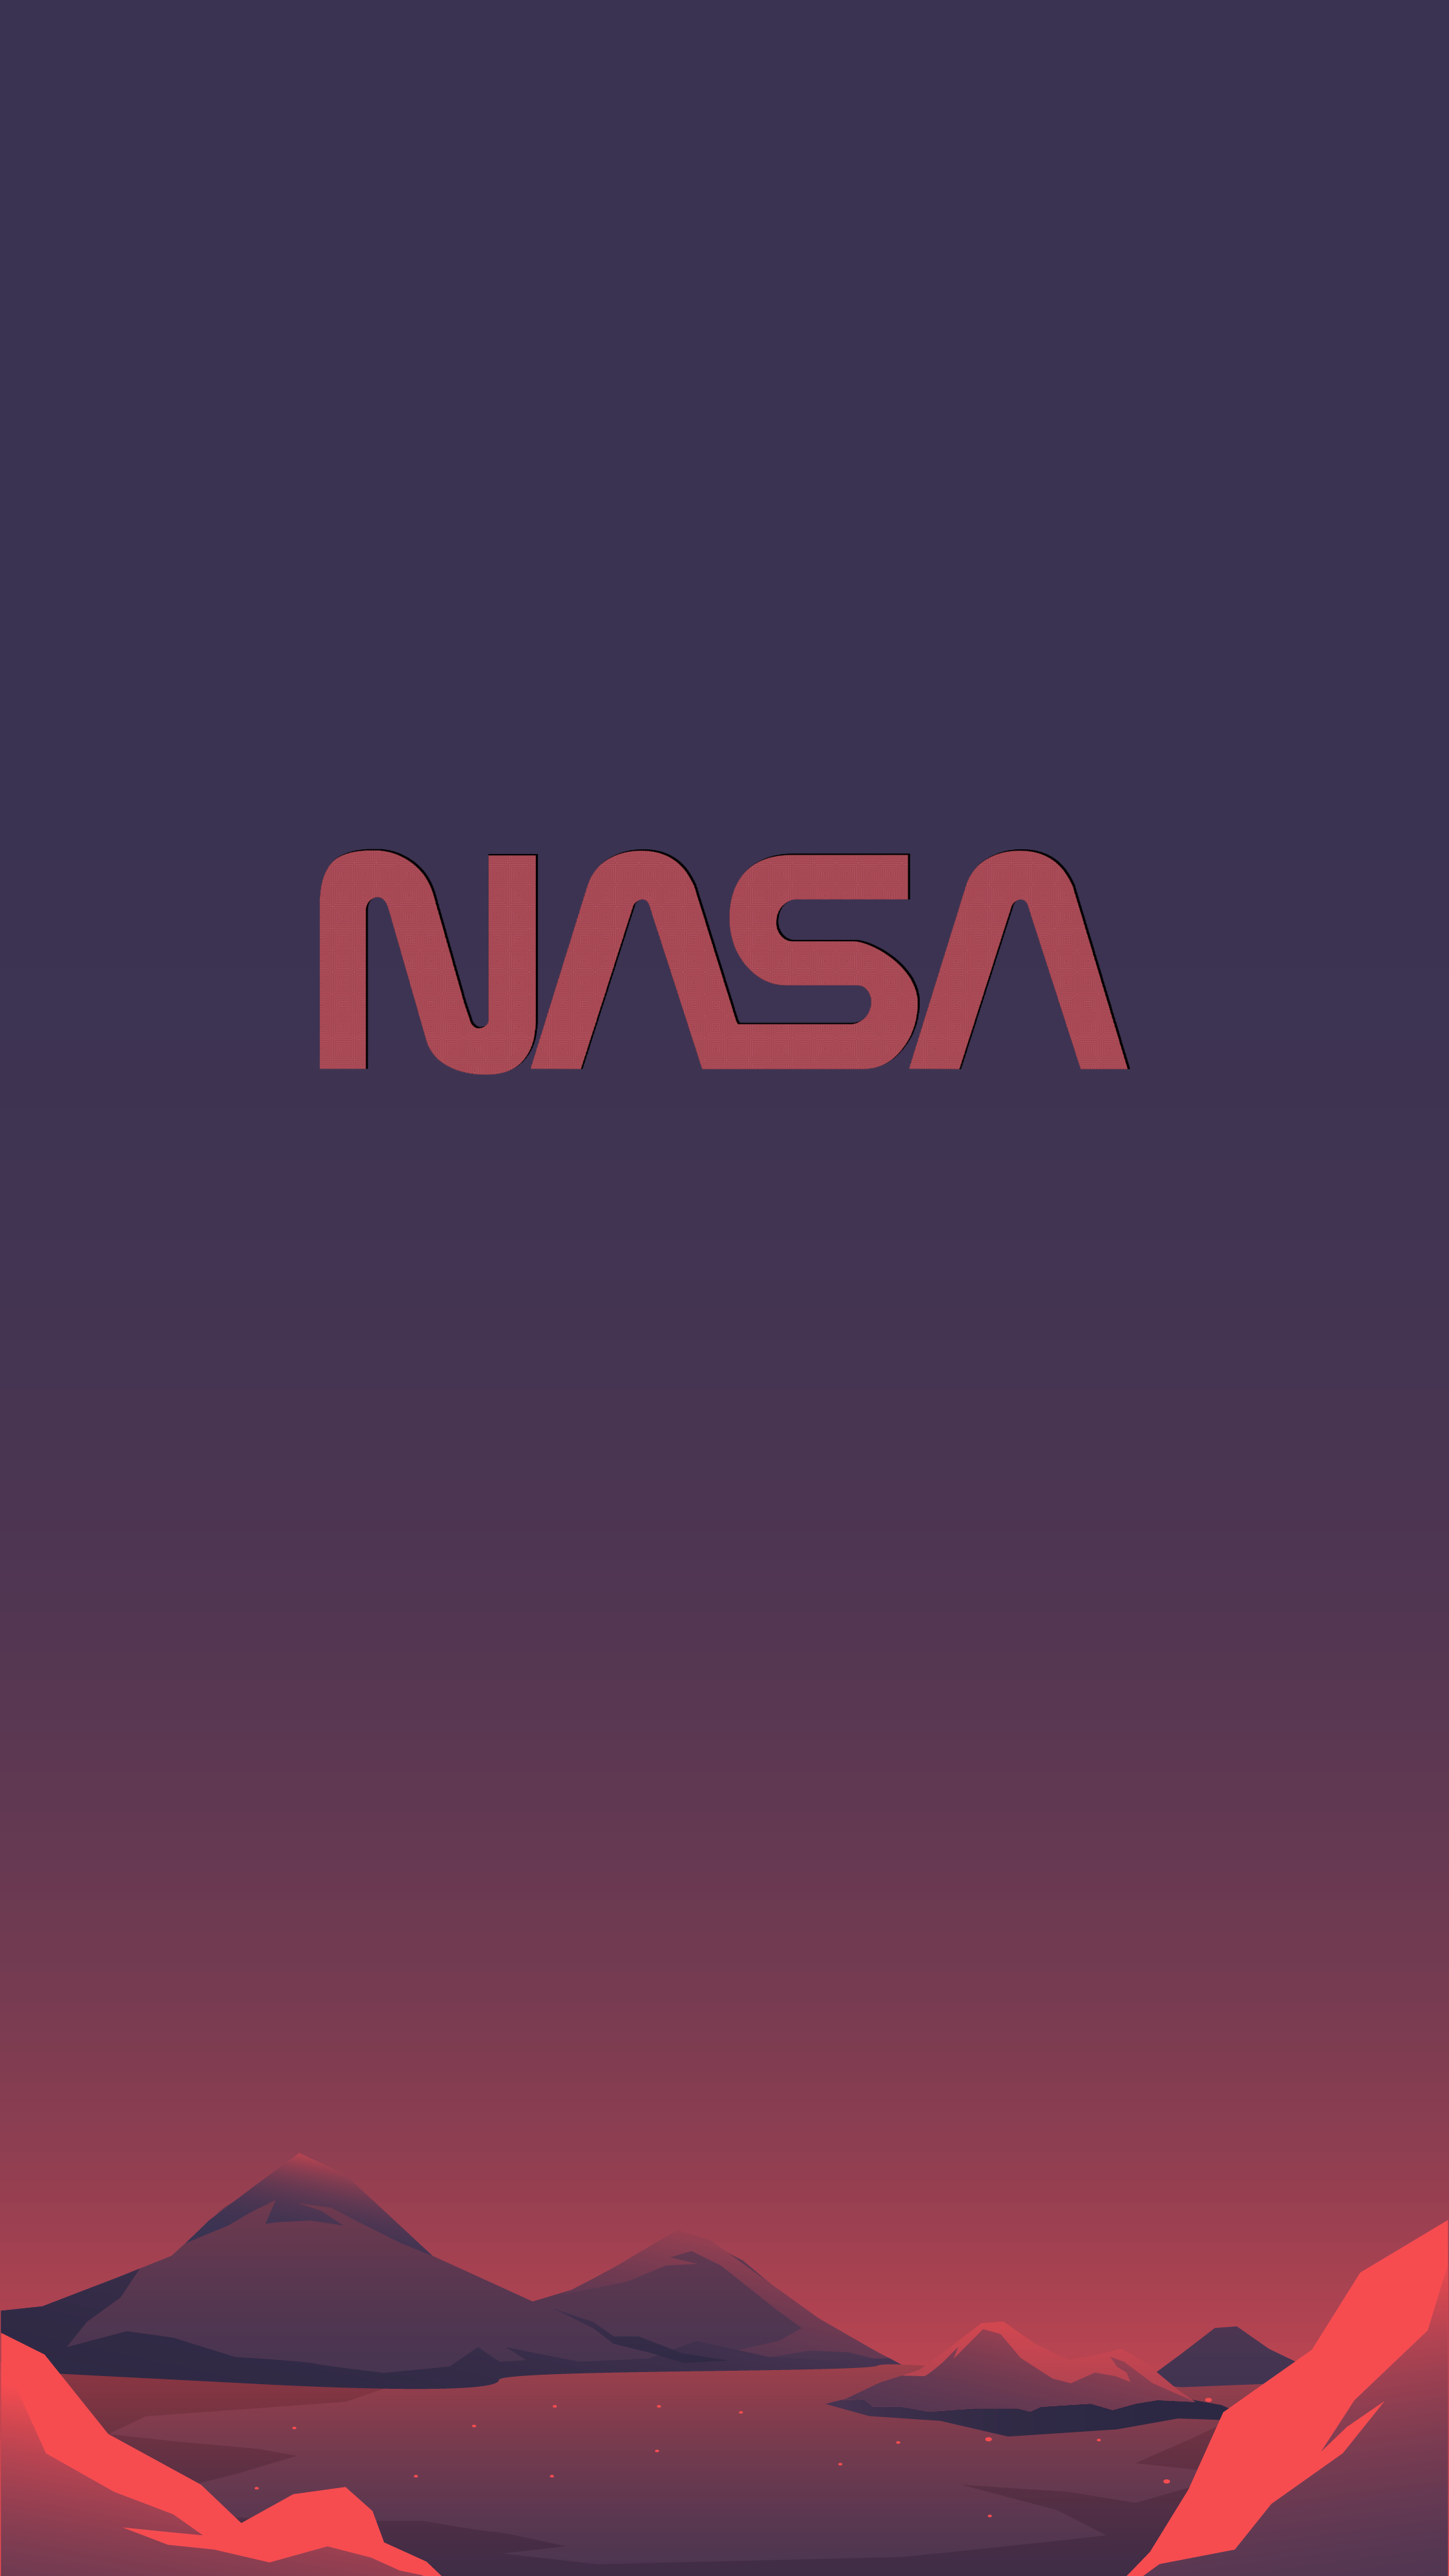 MARS NASA SPACEX WALLPAPERS 4K FOR MOBILE PHONE